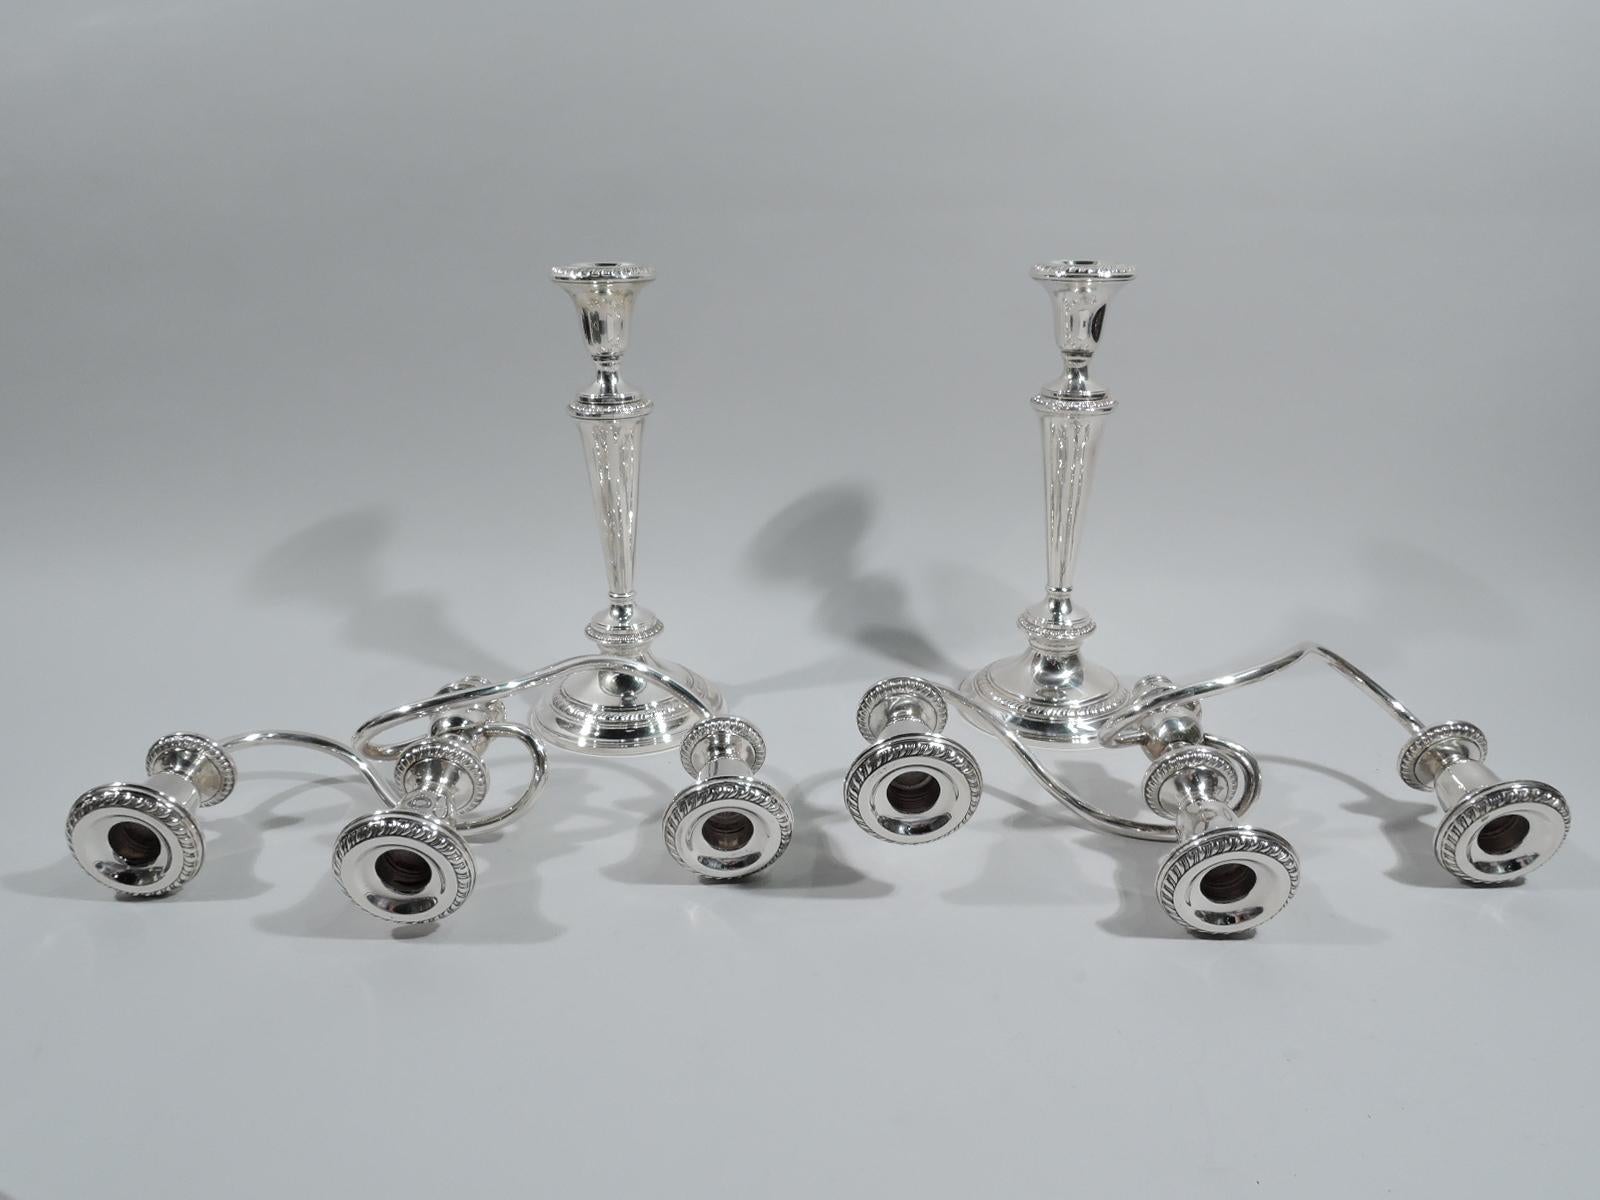 Pair of American sterling silver 3-light candelabra. Each: tapering and knopped shaft on domed foot. Urn sconce supporting 2 arms each terminating in single socket and wrapping around central raised socket. Converts to candlestick. Gadrooning. Fully